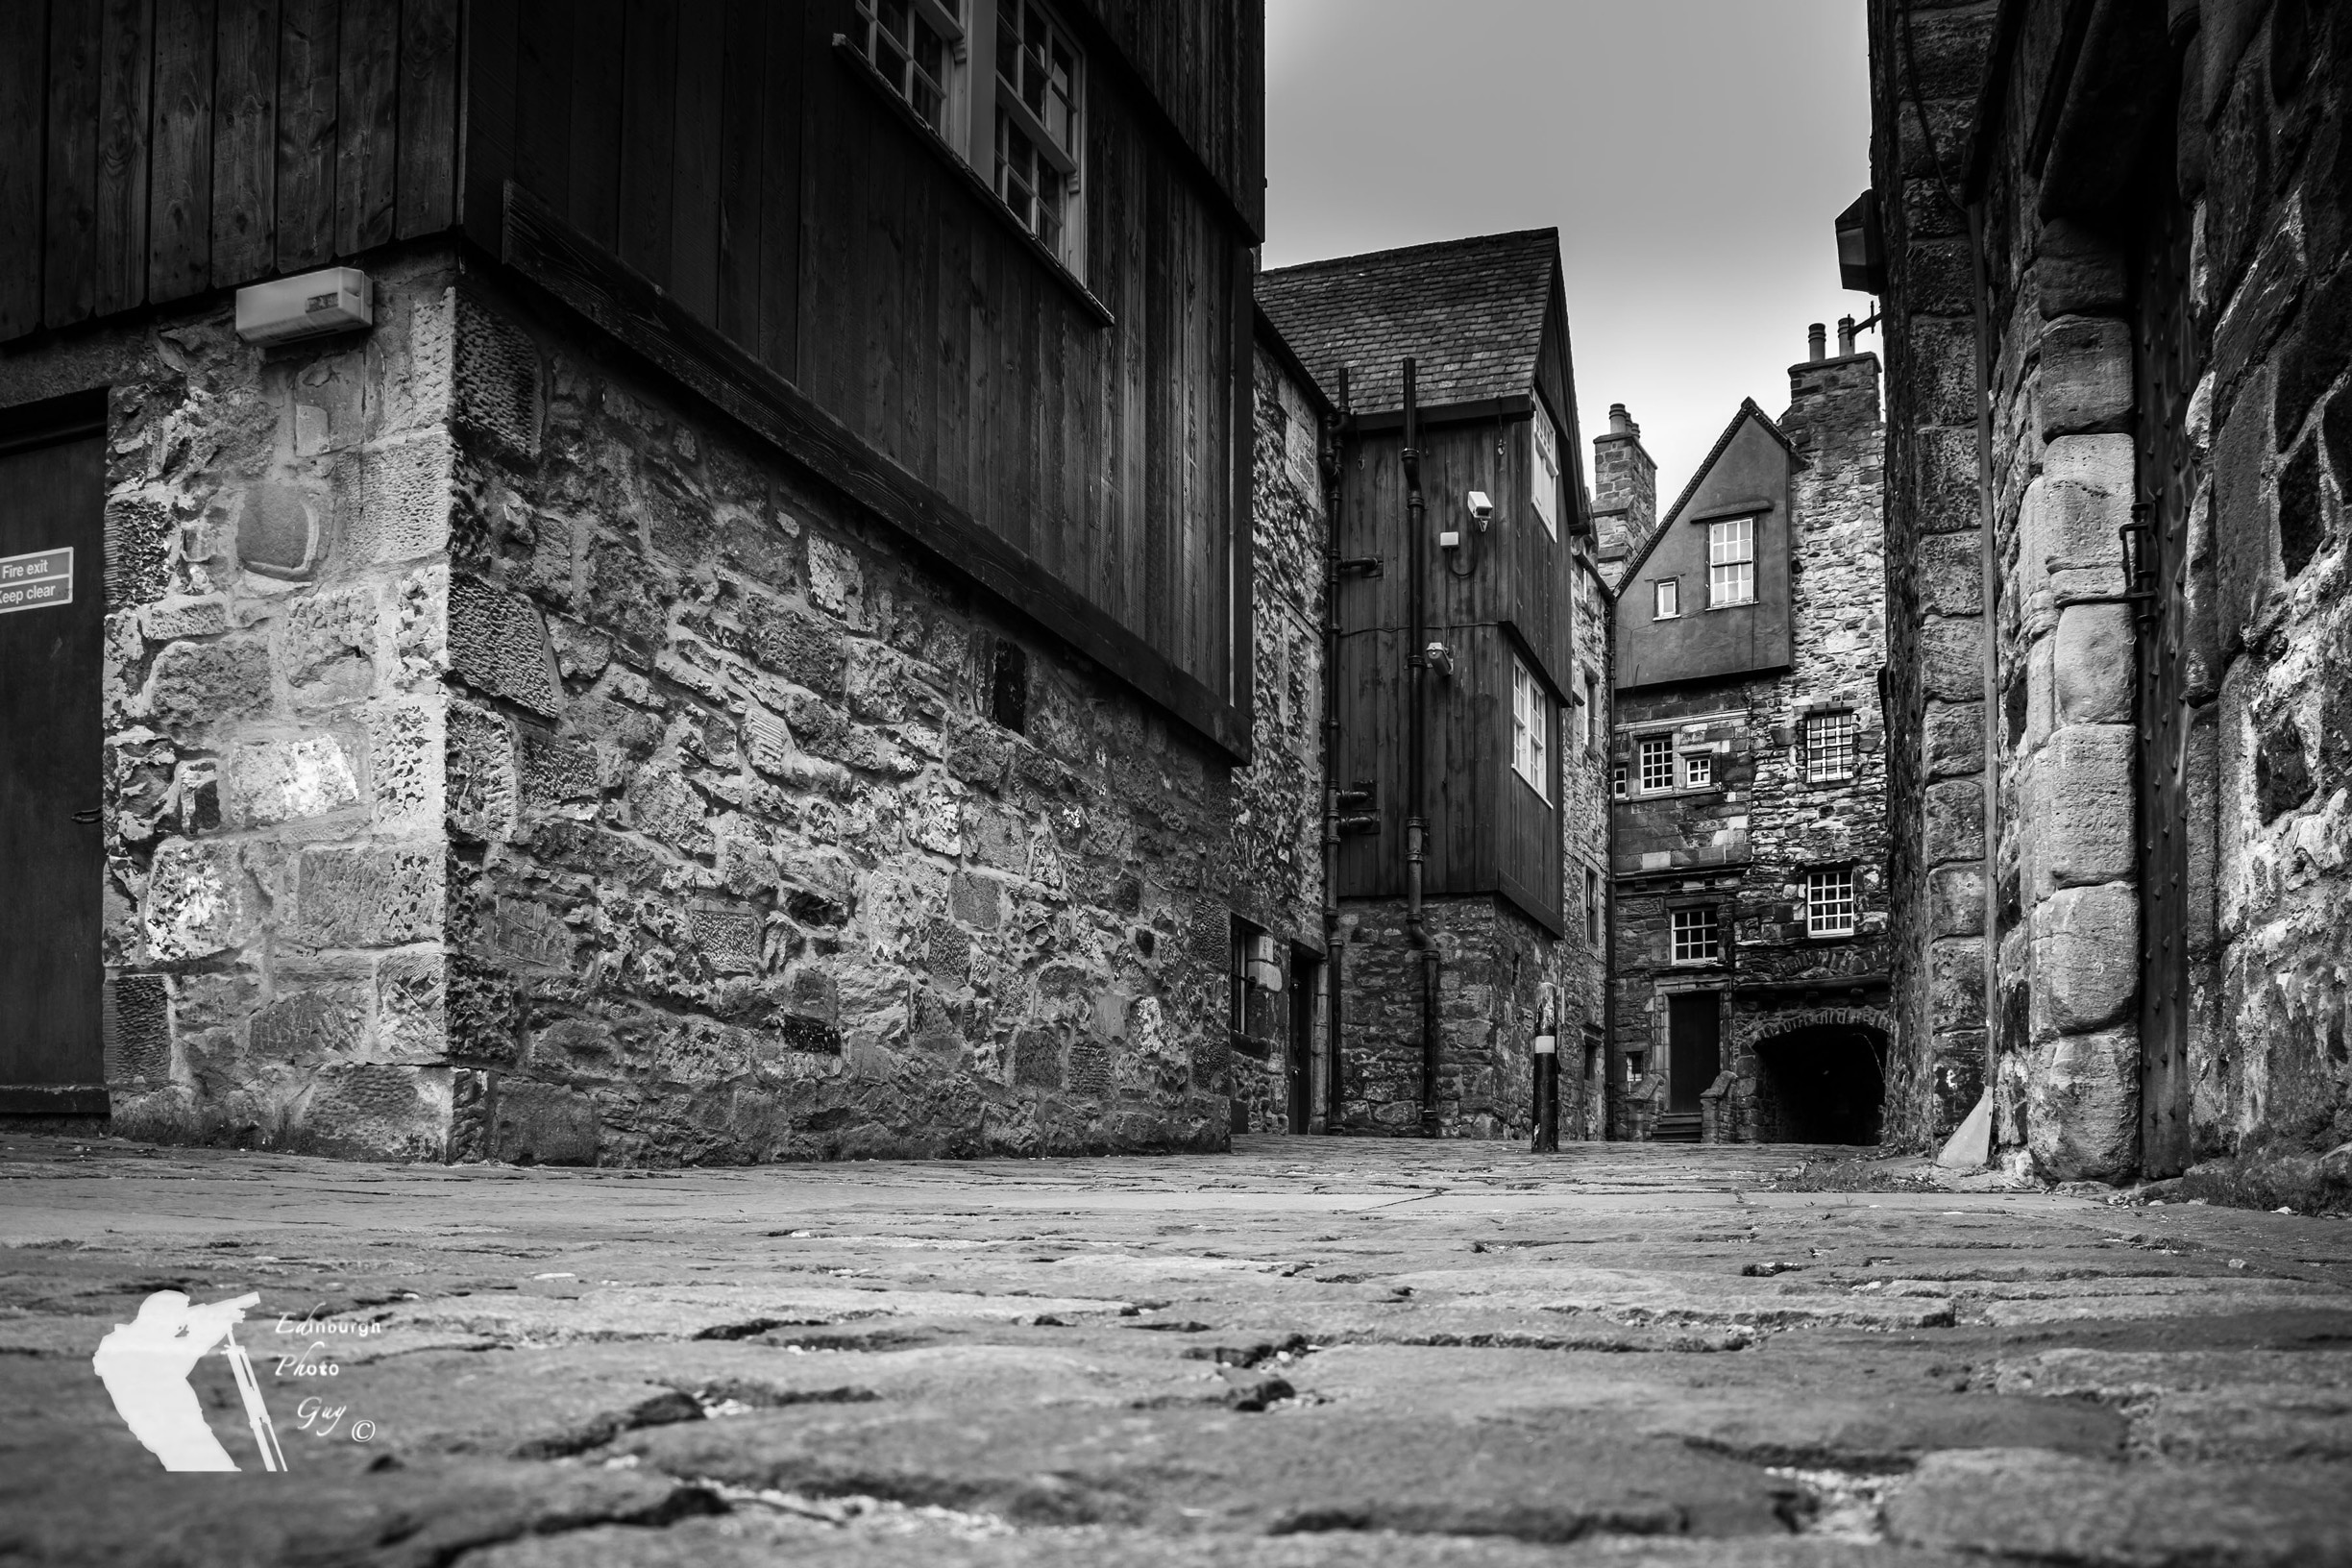 Bakehouse Close
© Paul Cunningham-Edinburgh Photo Guy 

Bakehouse Close, Canongate on Edinburgh's Royal Mile is one of my favourite closes, because it's so well preserved. Edinburgh Heritage have documents from the 1700's with all the names of the people that lived in the historic close, including Lord Adam Gordon; David Doig, merchant; William Dunbar, weaver and Ewen. Visiting here gives a good impression of what living in the old city must have been like.